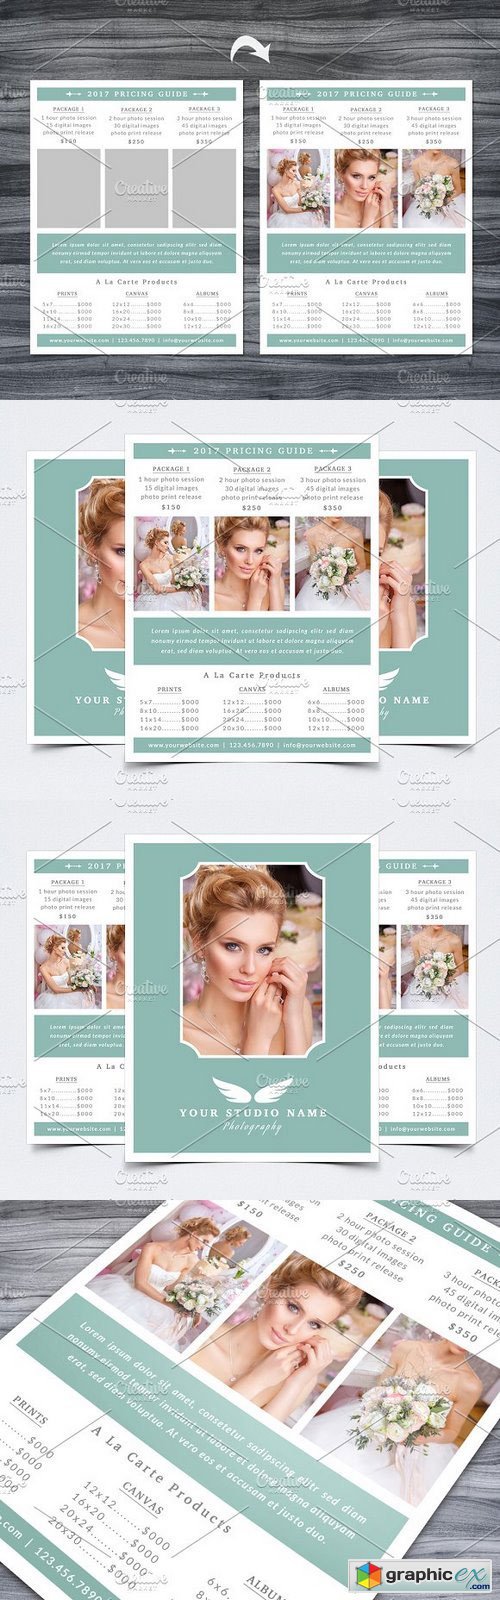 Photography Pricing Guide Template 1196414